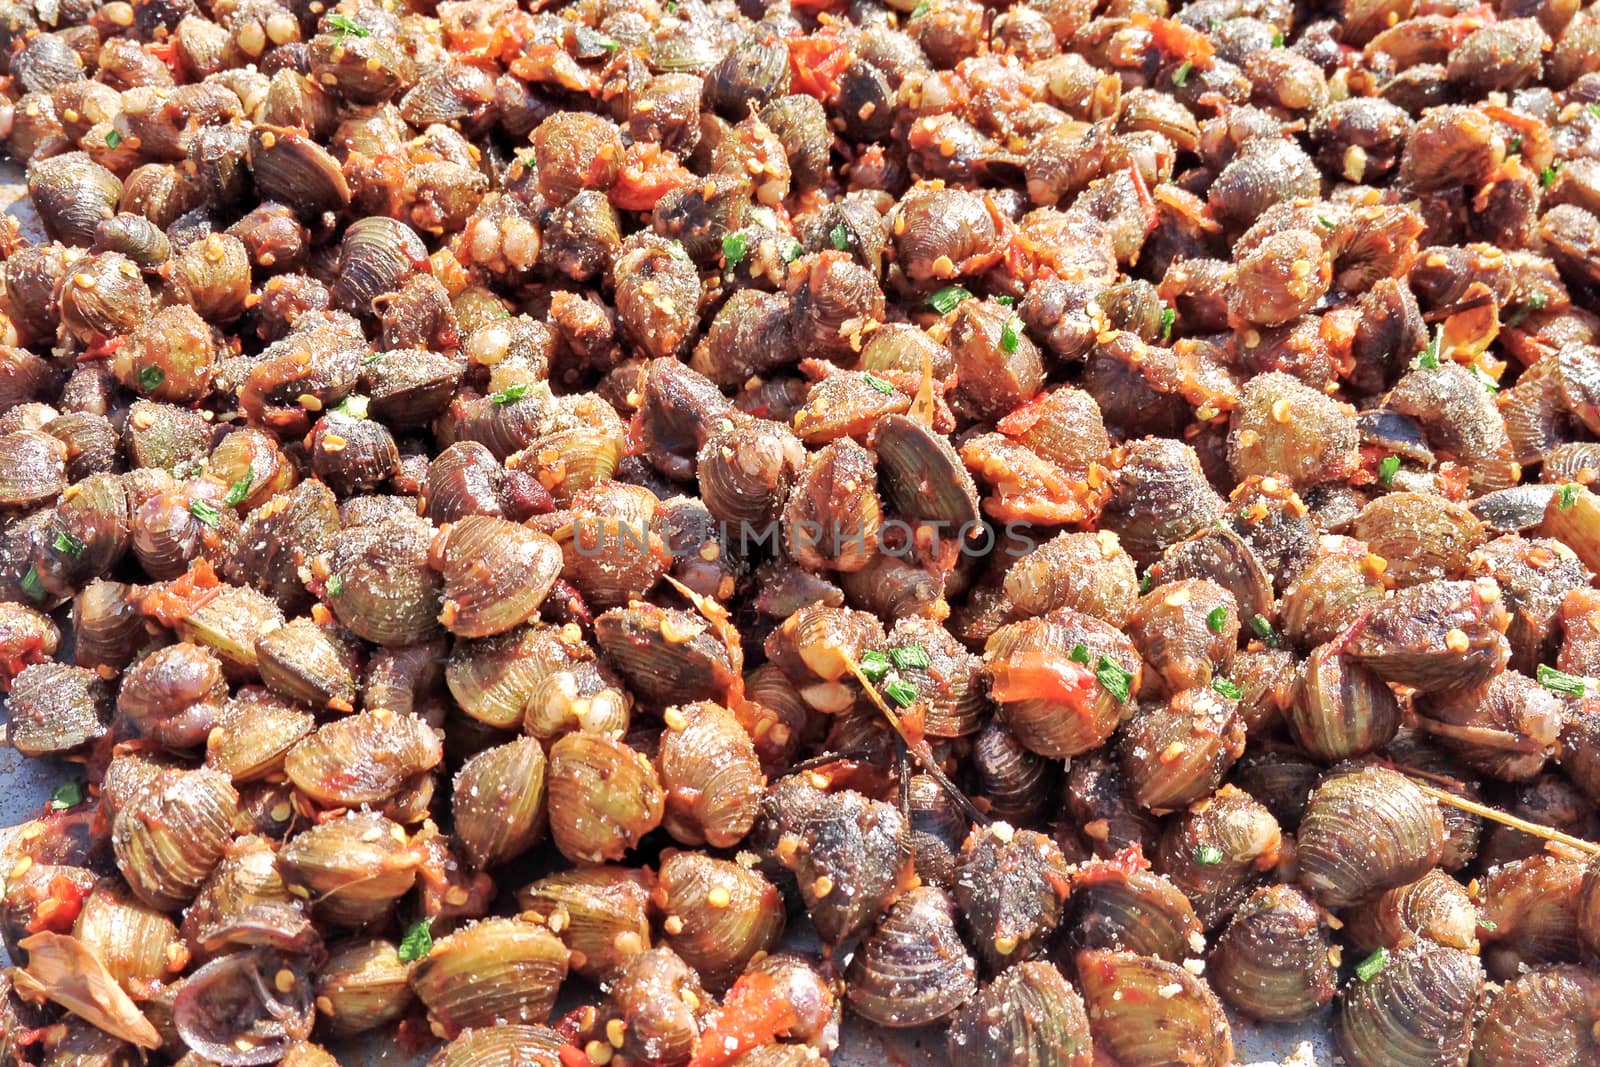 Spicy small shells for sale, local street food in Siem Reap Cambodia